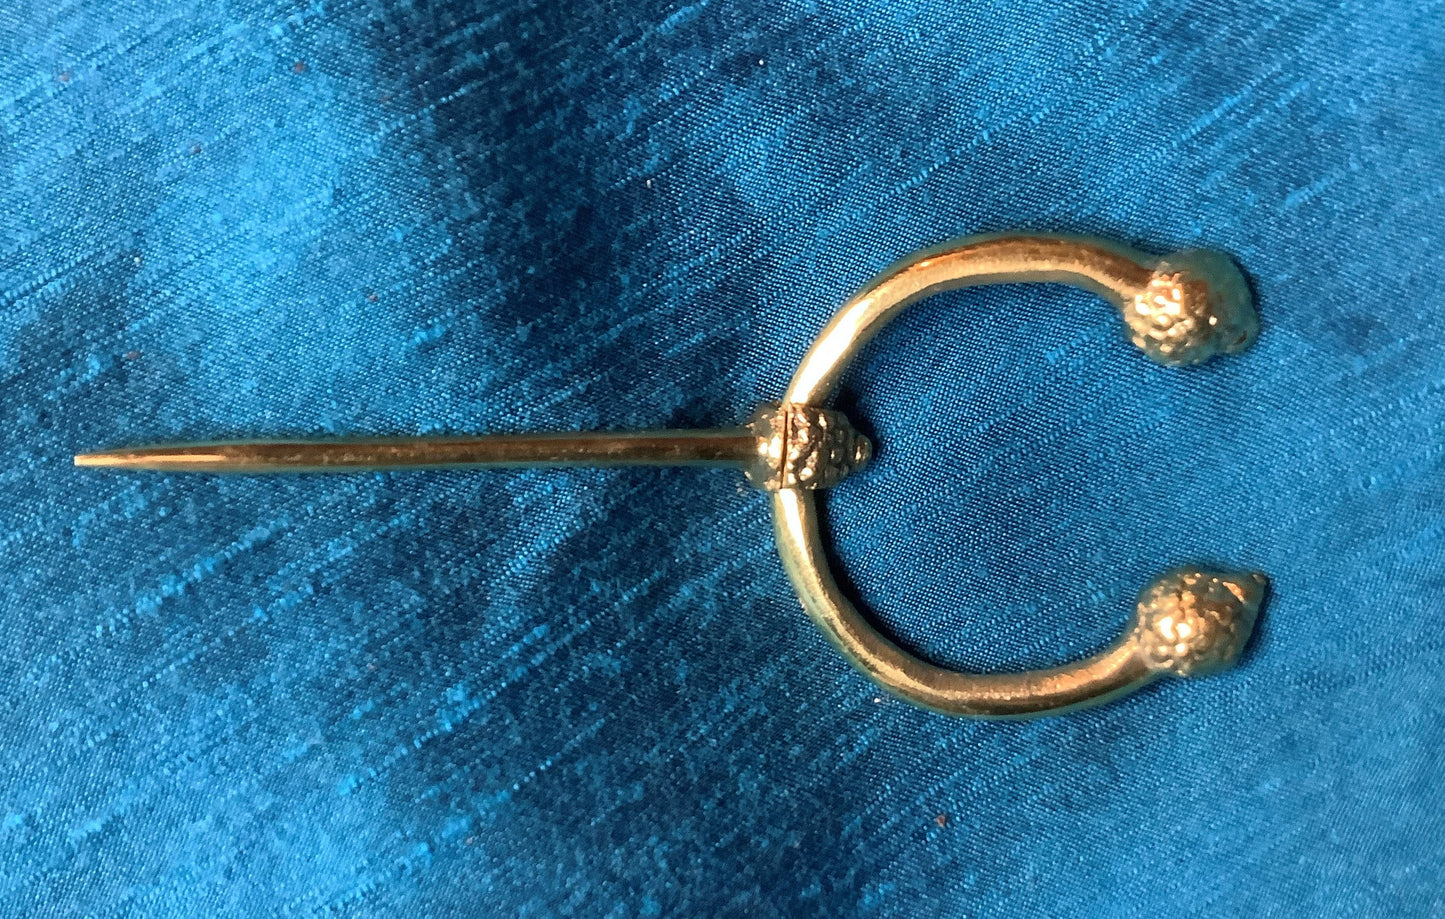 Penannular Brooch with Thistle Terminals